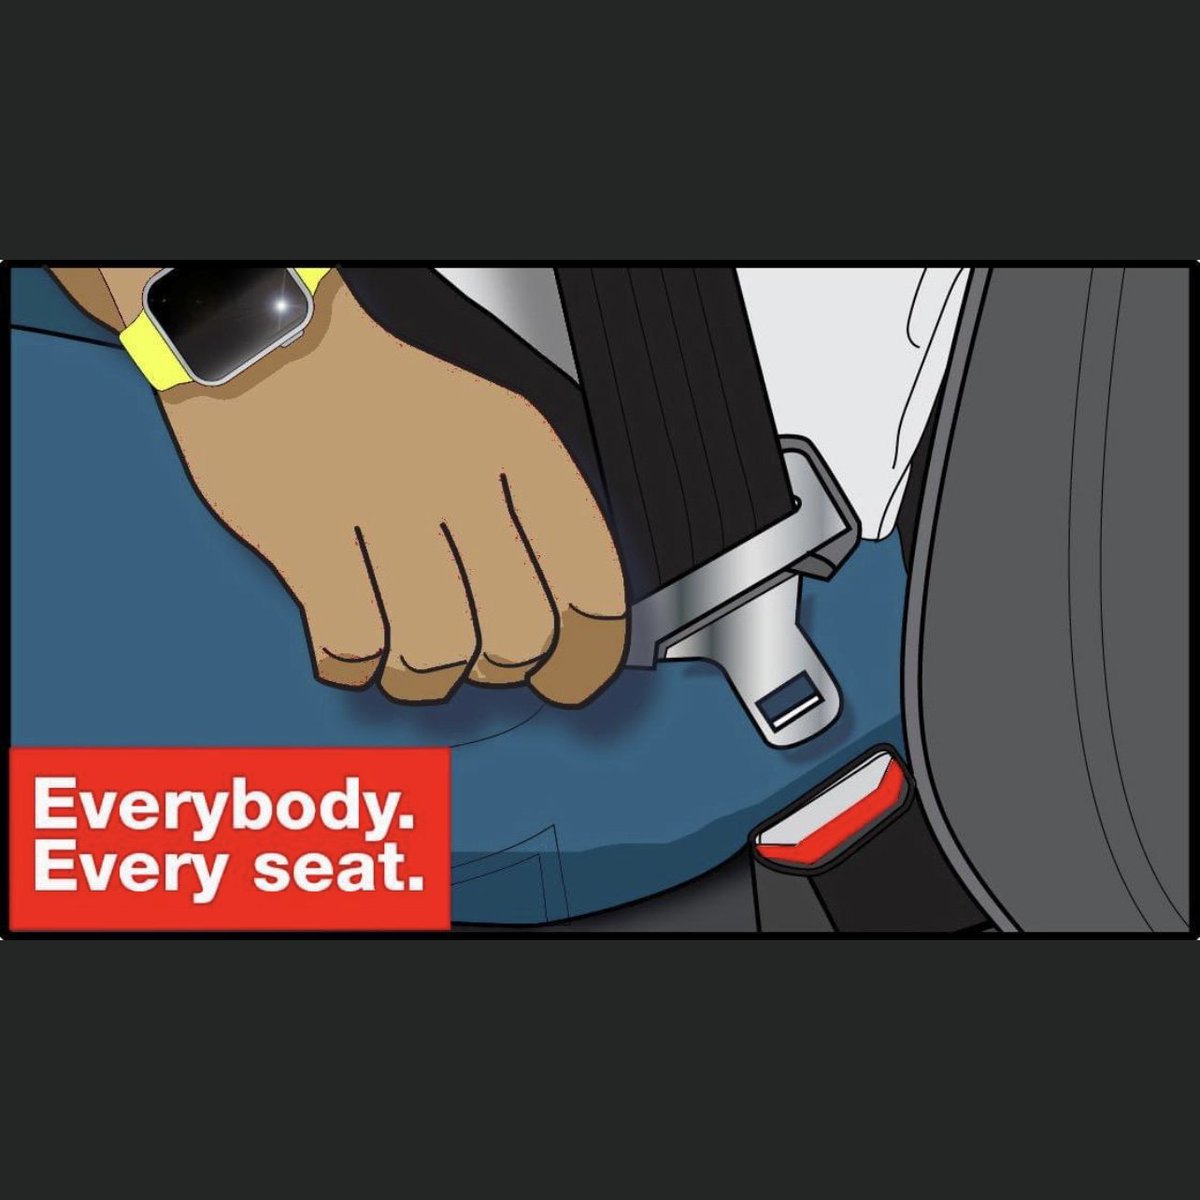 Seat Belts Save Lives! You must buckle up, it's the law! #VisionZero